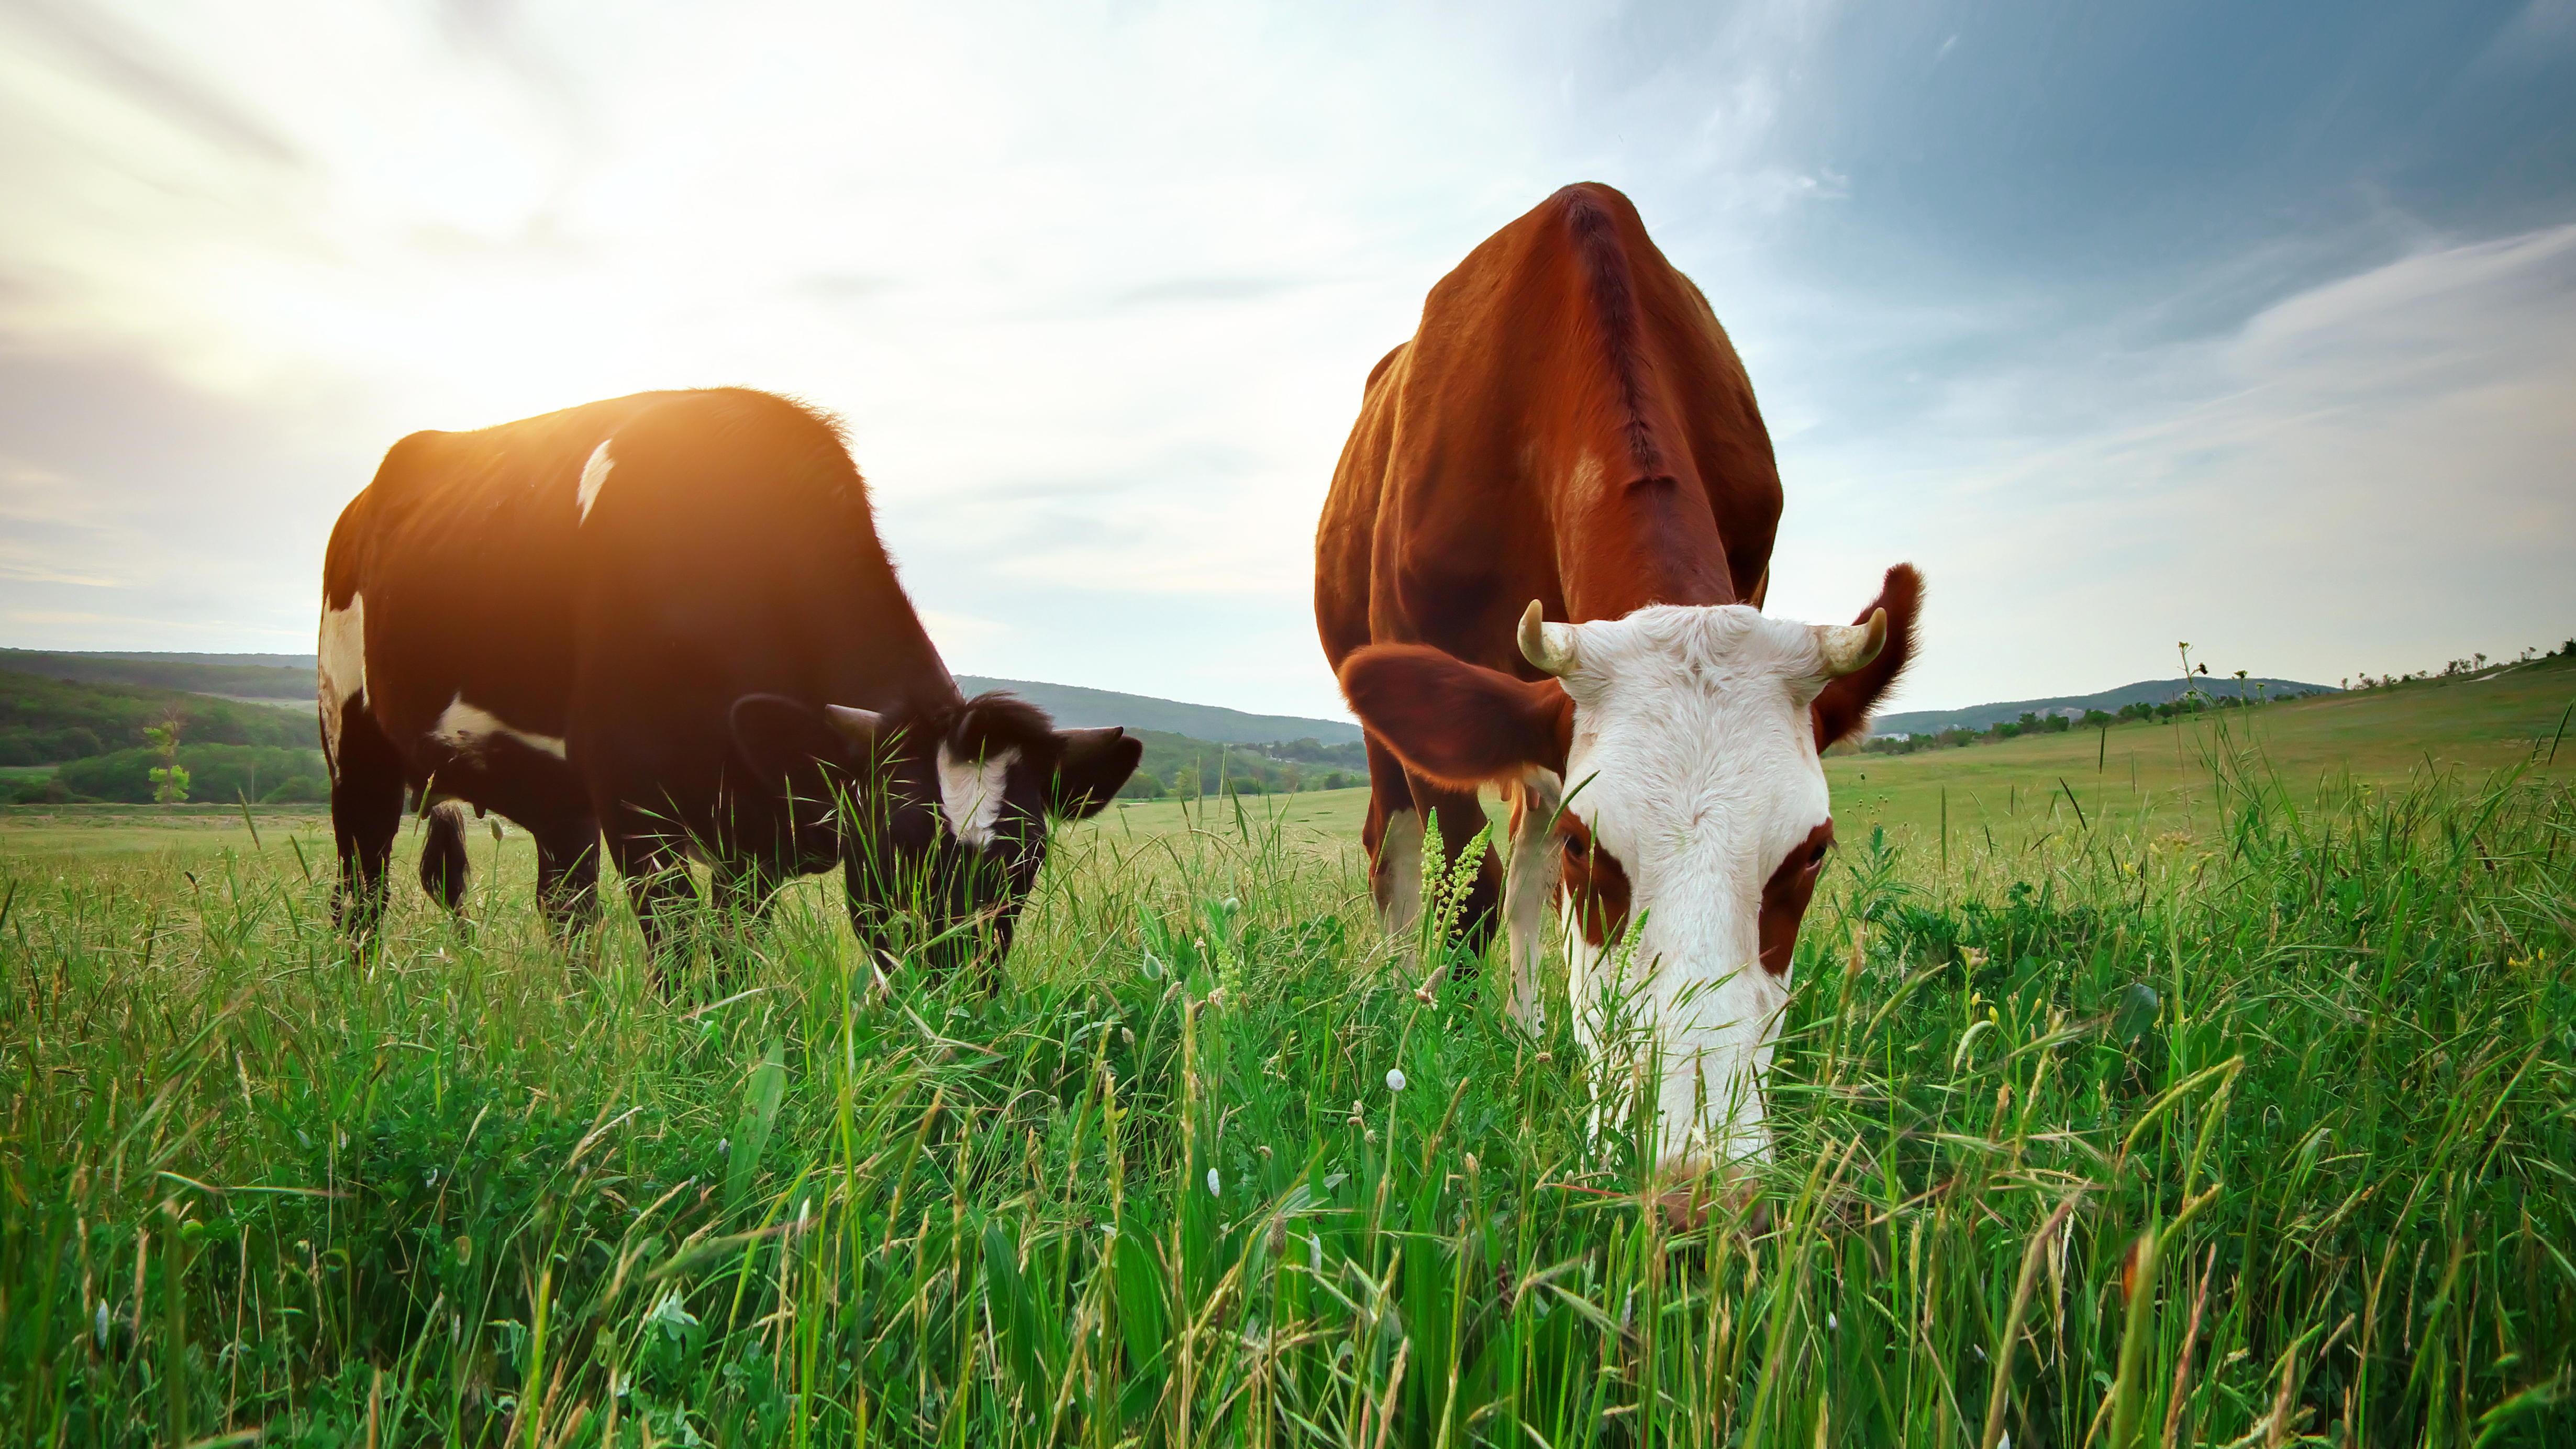 Two grazing cows (16:9)